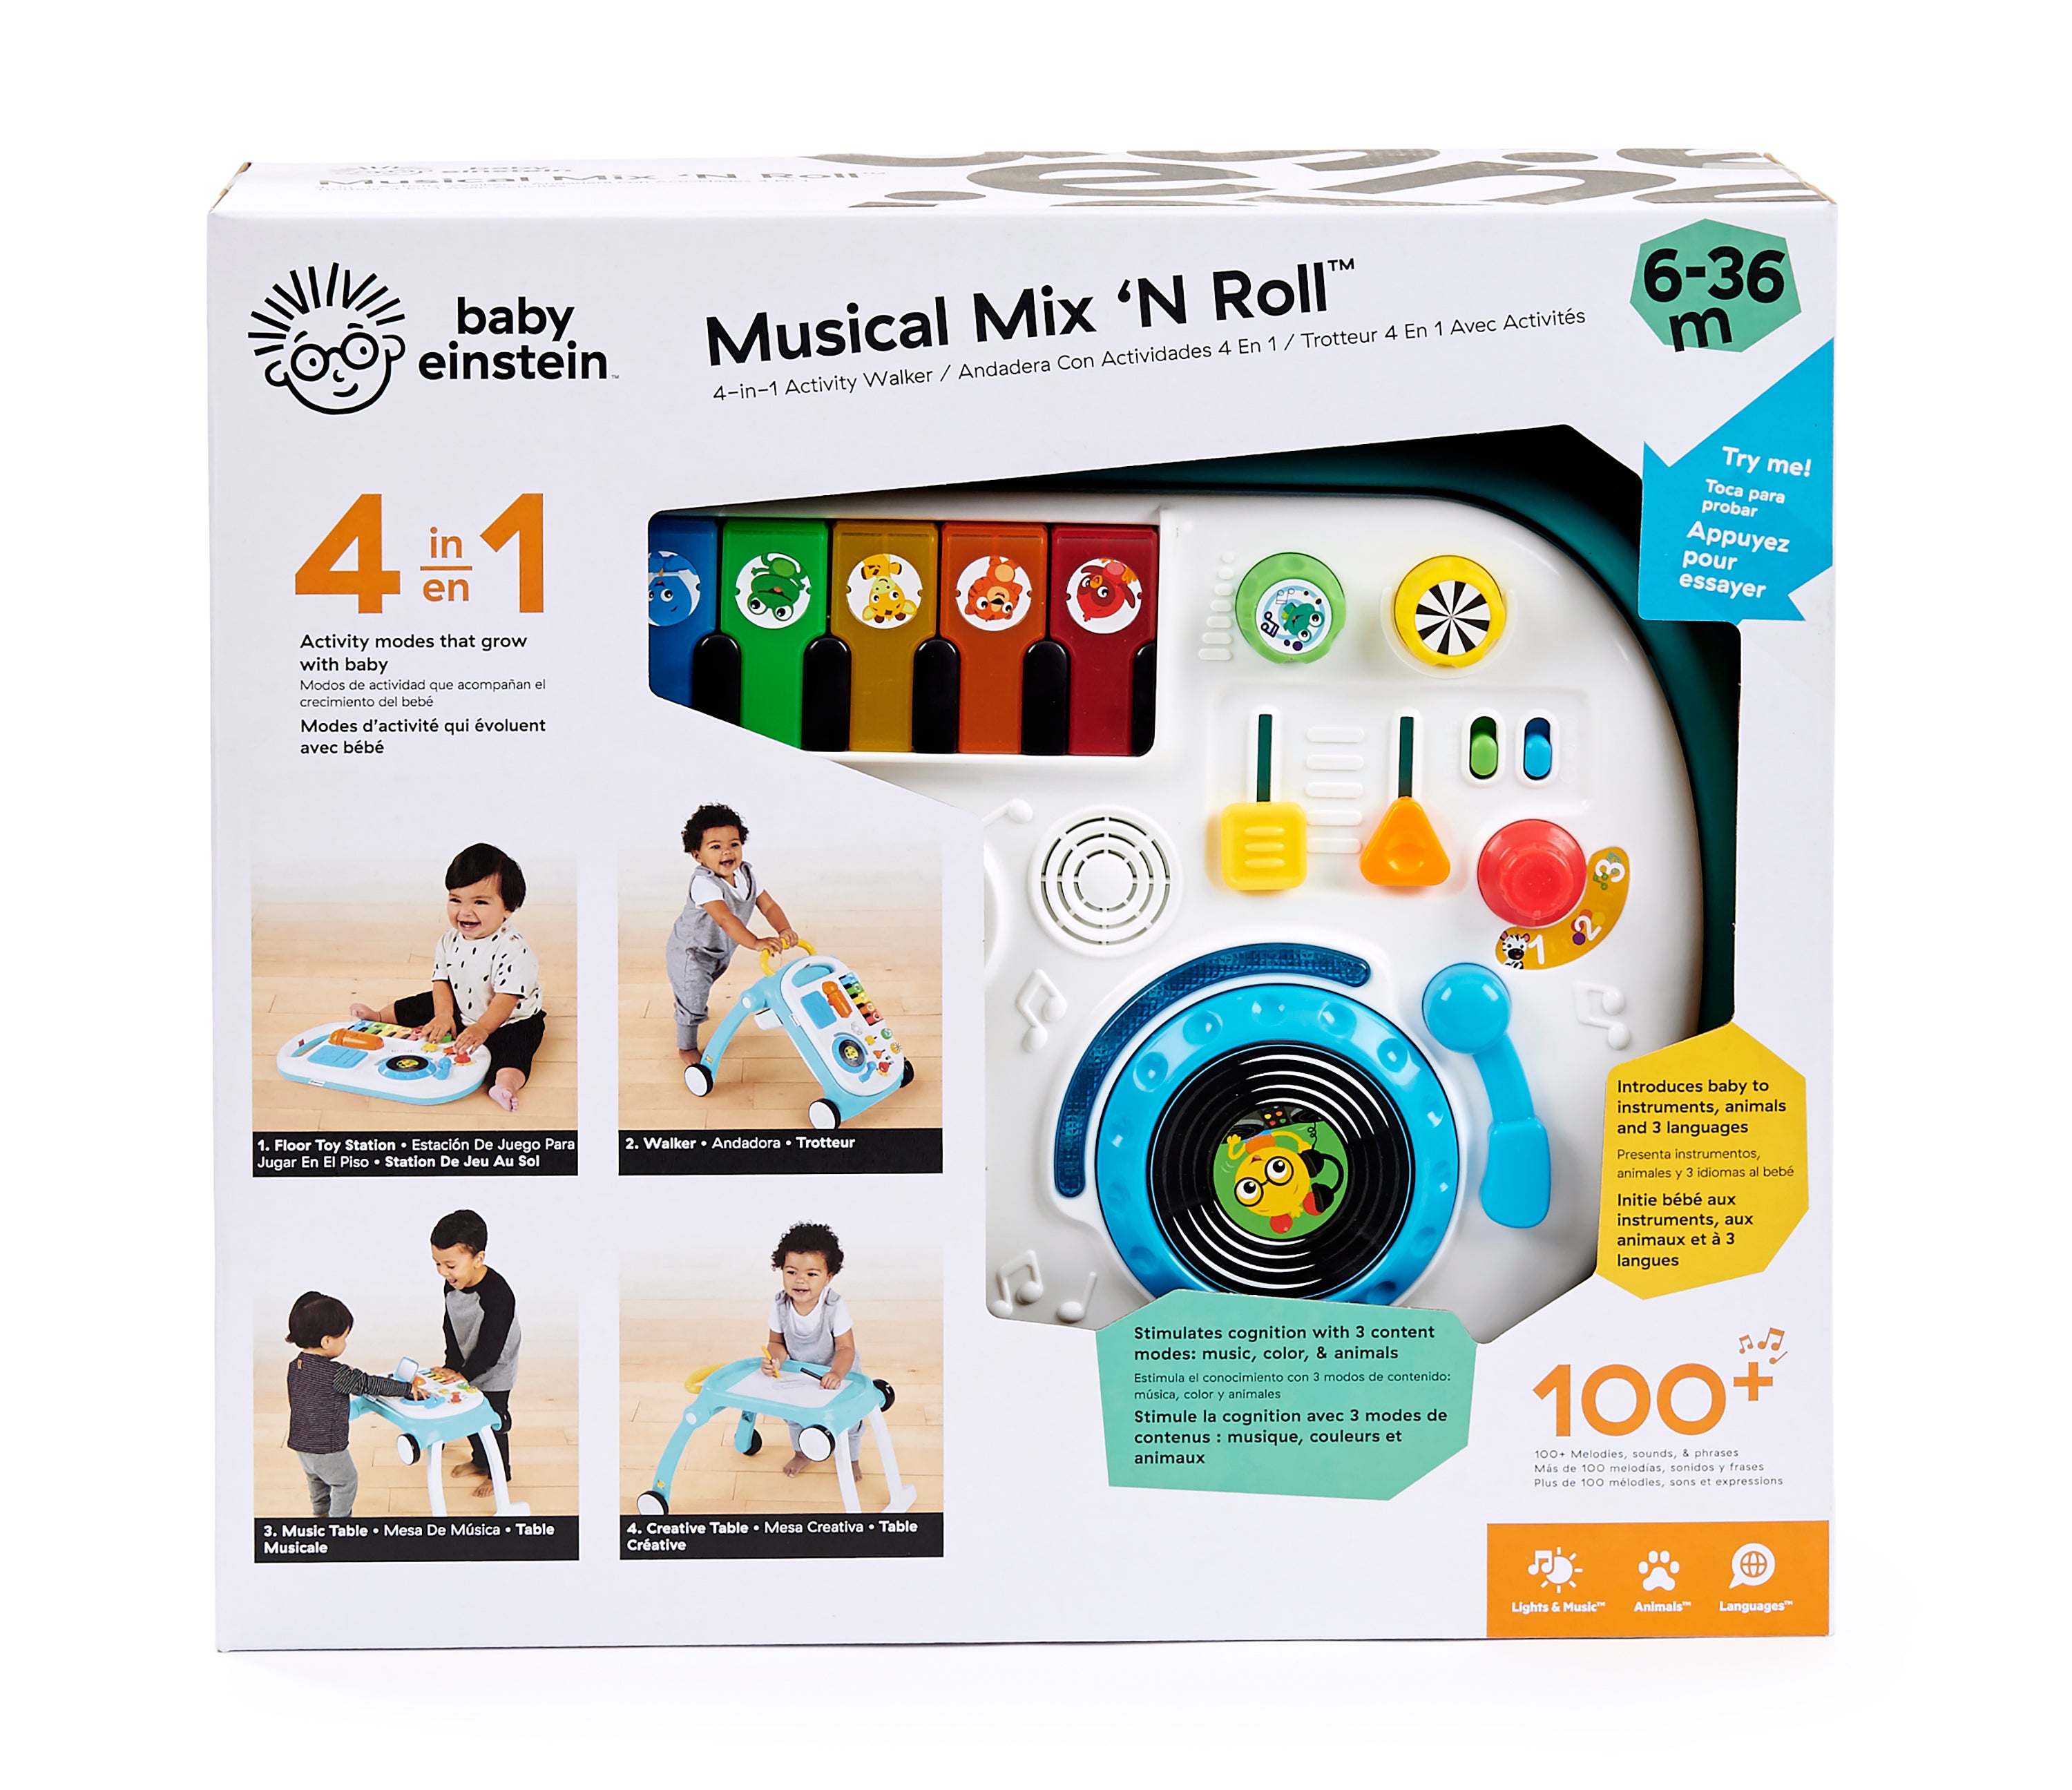 Musical Mix ‘N Roll 4-in-1 Activity Walker